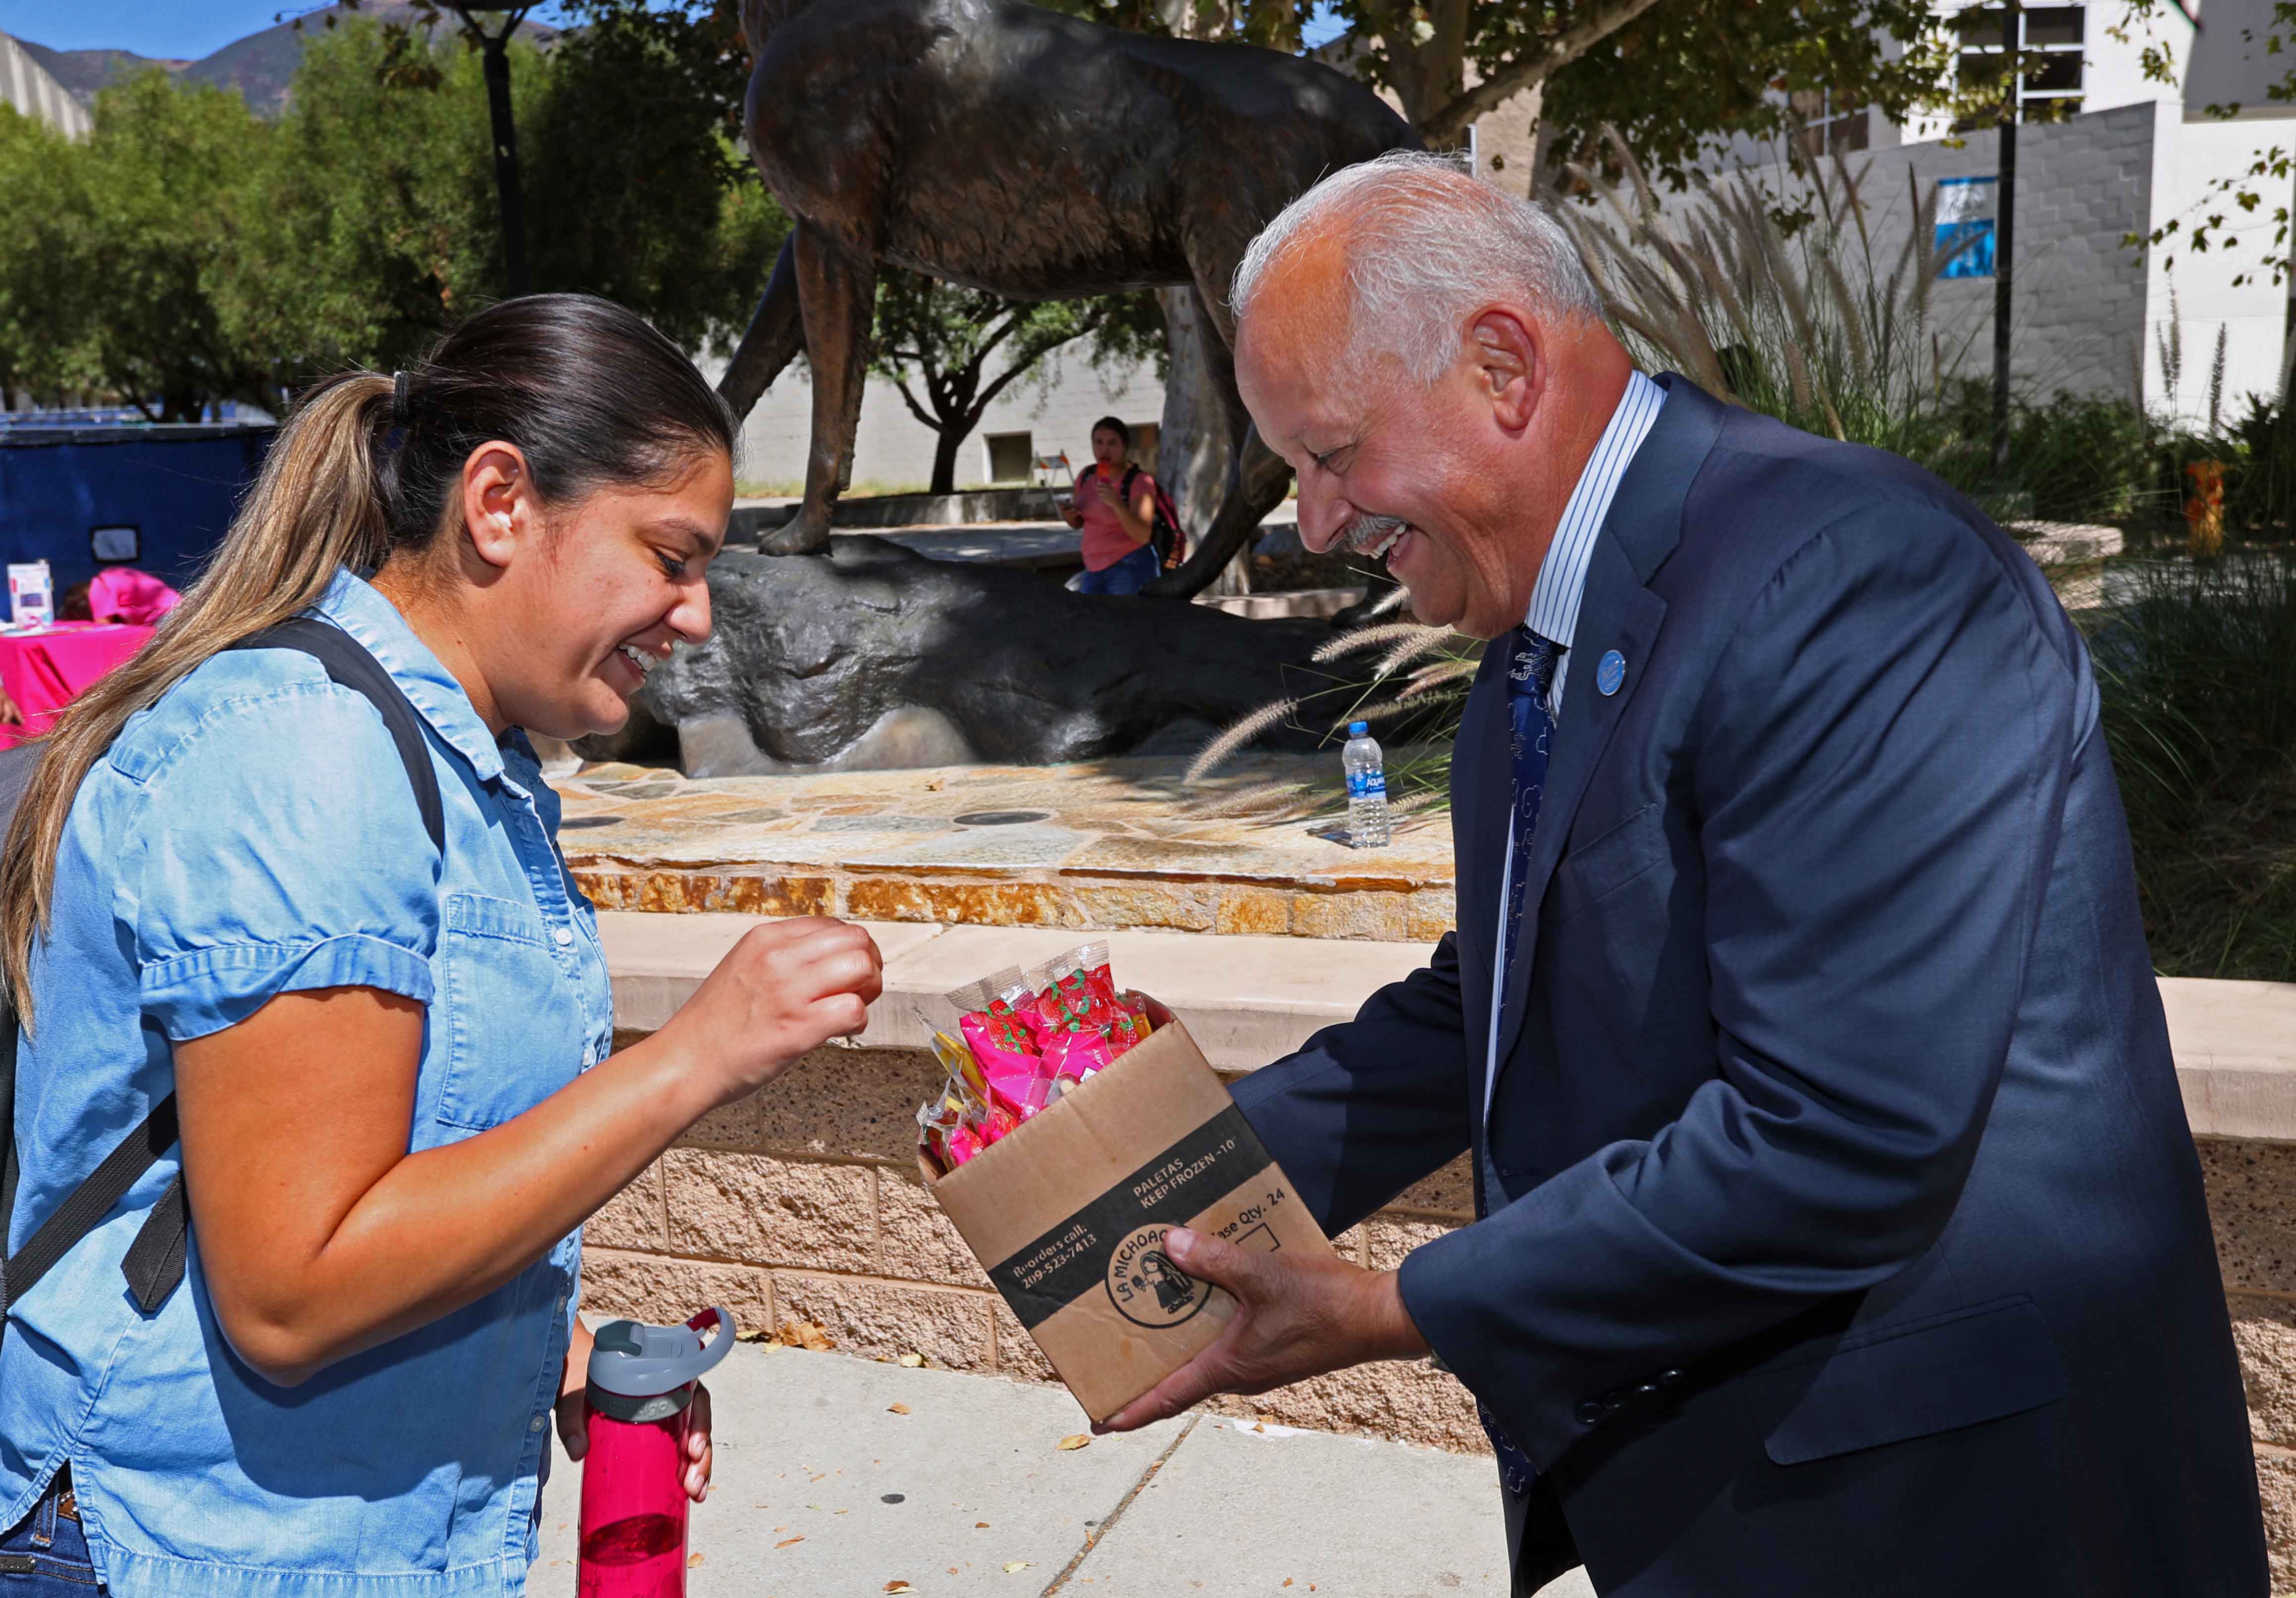 Cal State San Bernardino President Tomás D. Morales and the university’s Orientation and First Year Experience handed out popsicles to students near the Wild Song statue on Sept. 23.